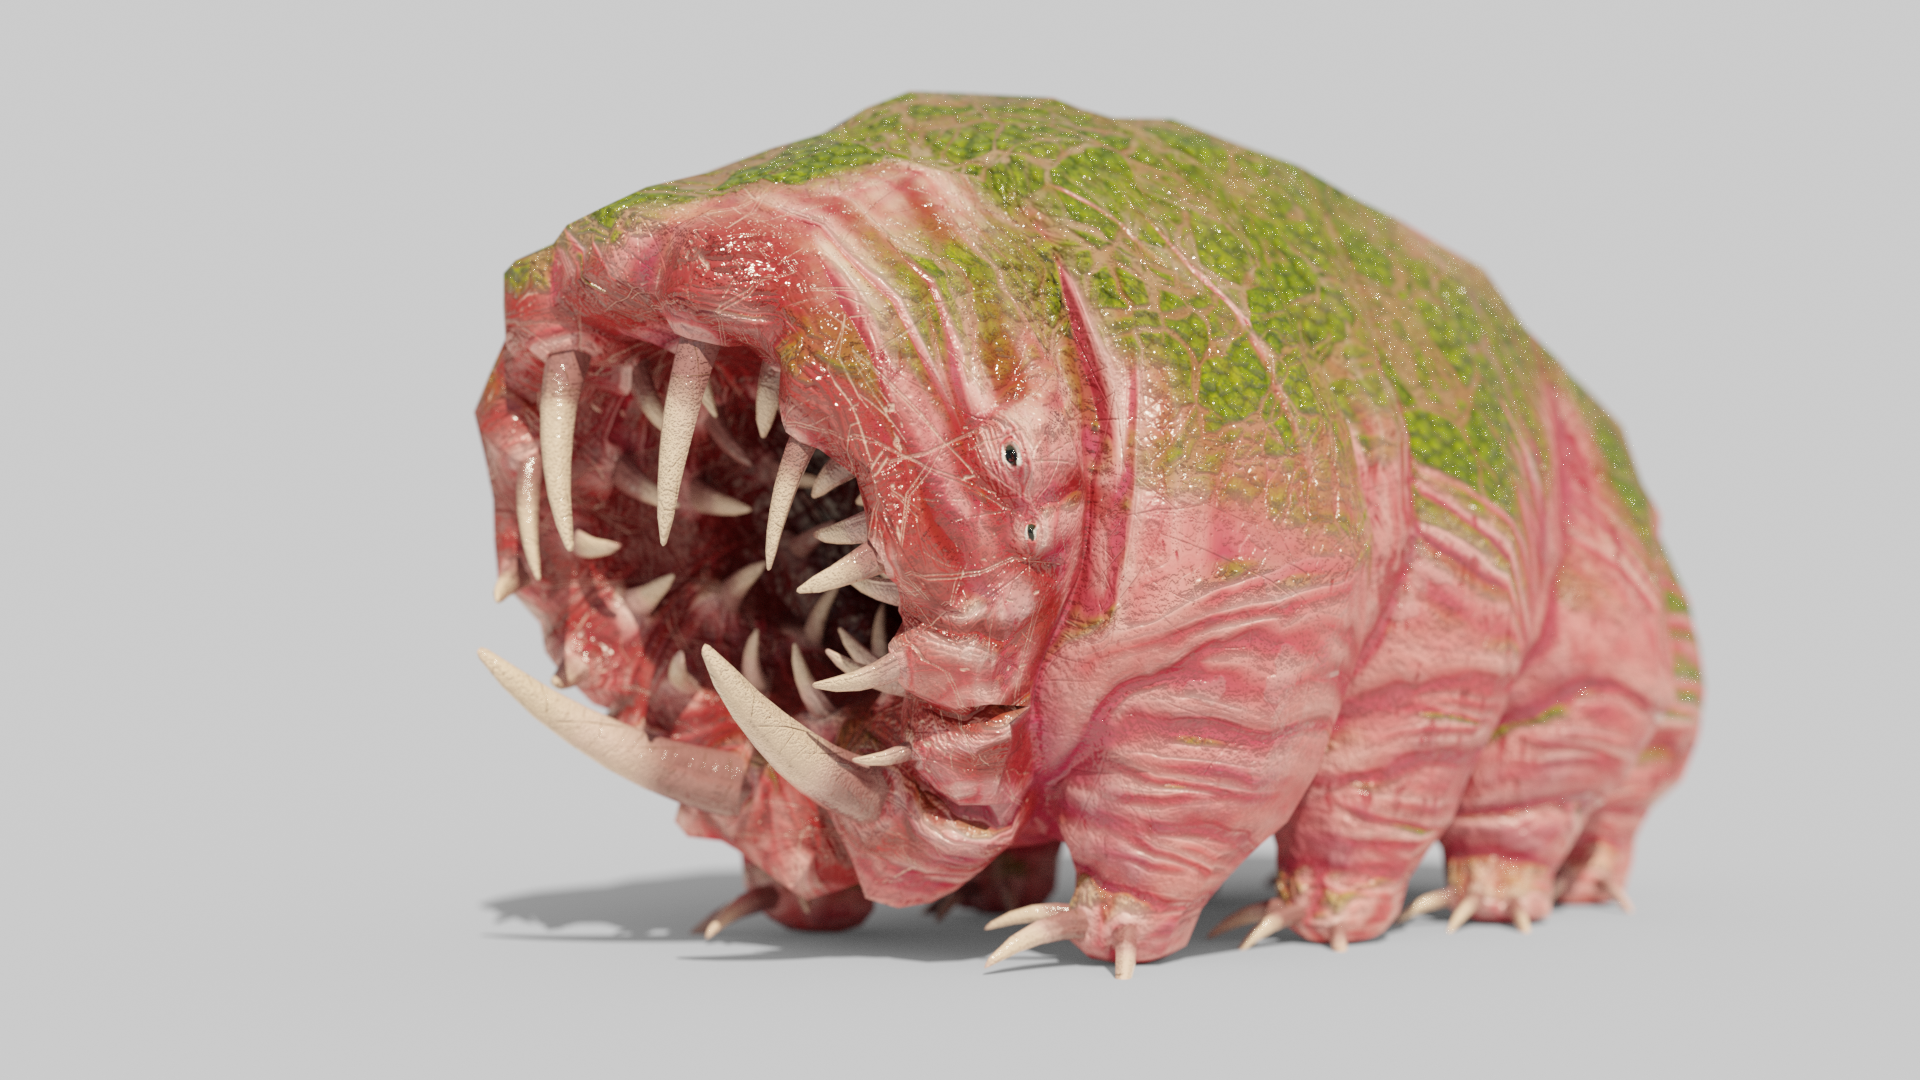 Mossy Monster with Giant Teeth, Body of Waterbear Tardigrade Moss Piglet